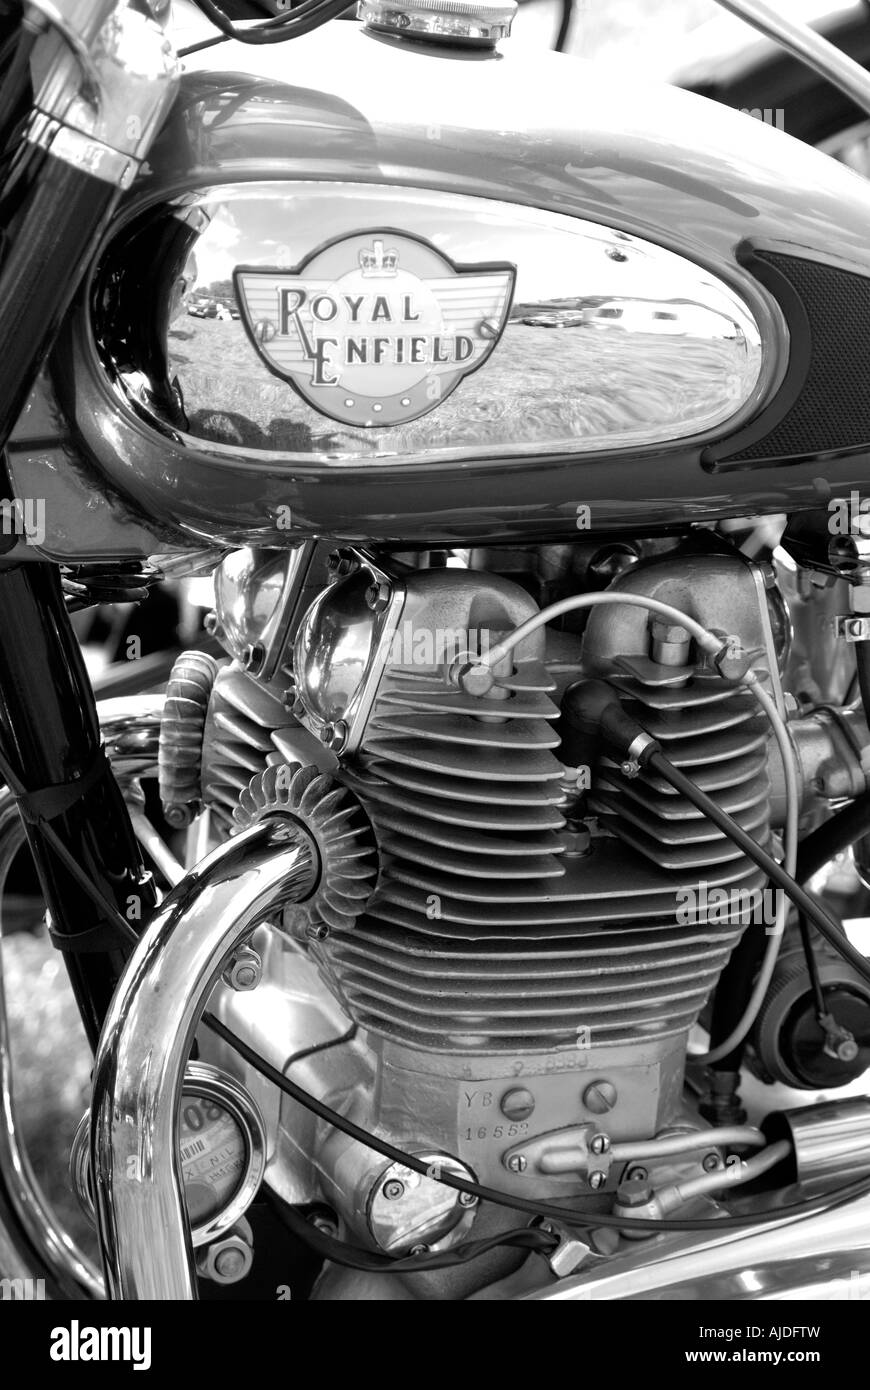 Close up shot of a Royal Enfield motorcycle engine and fuel tank in black and white Stock Photo